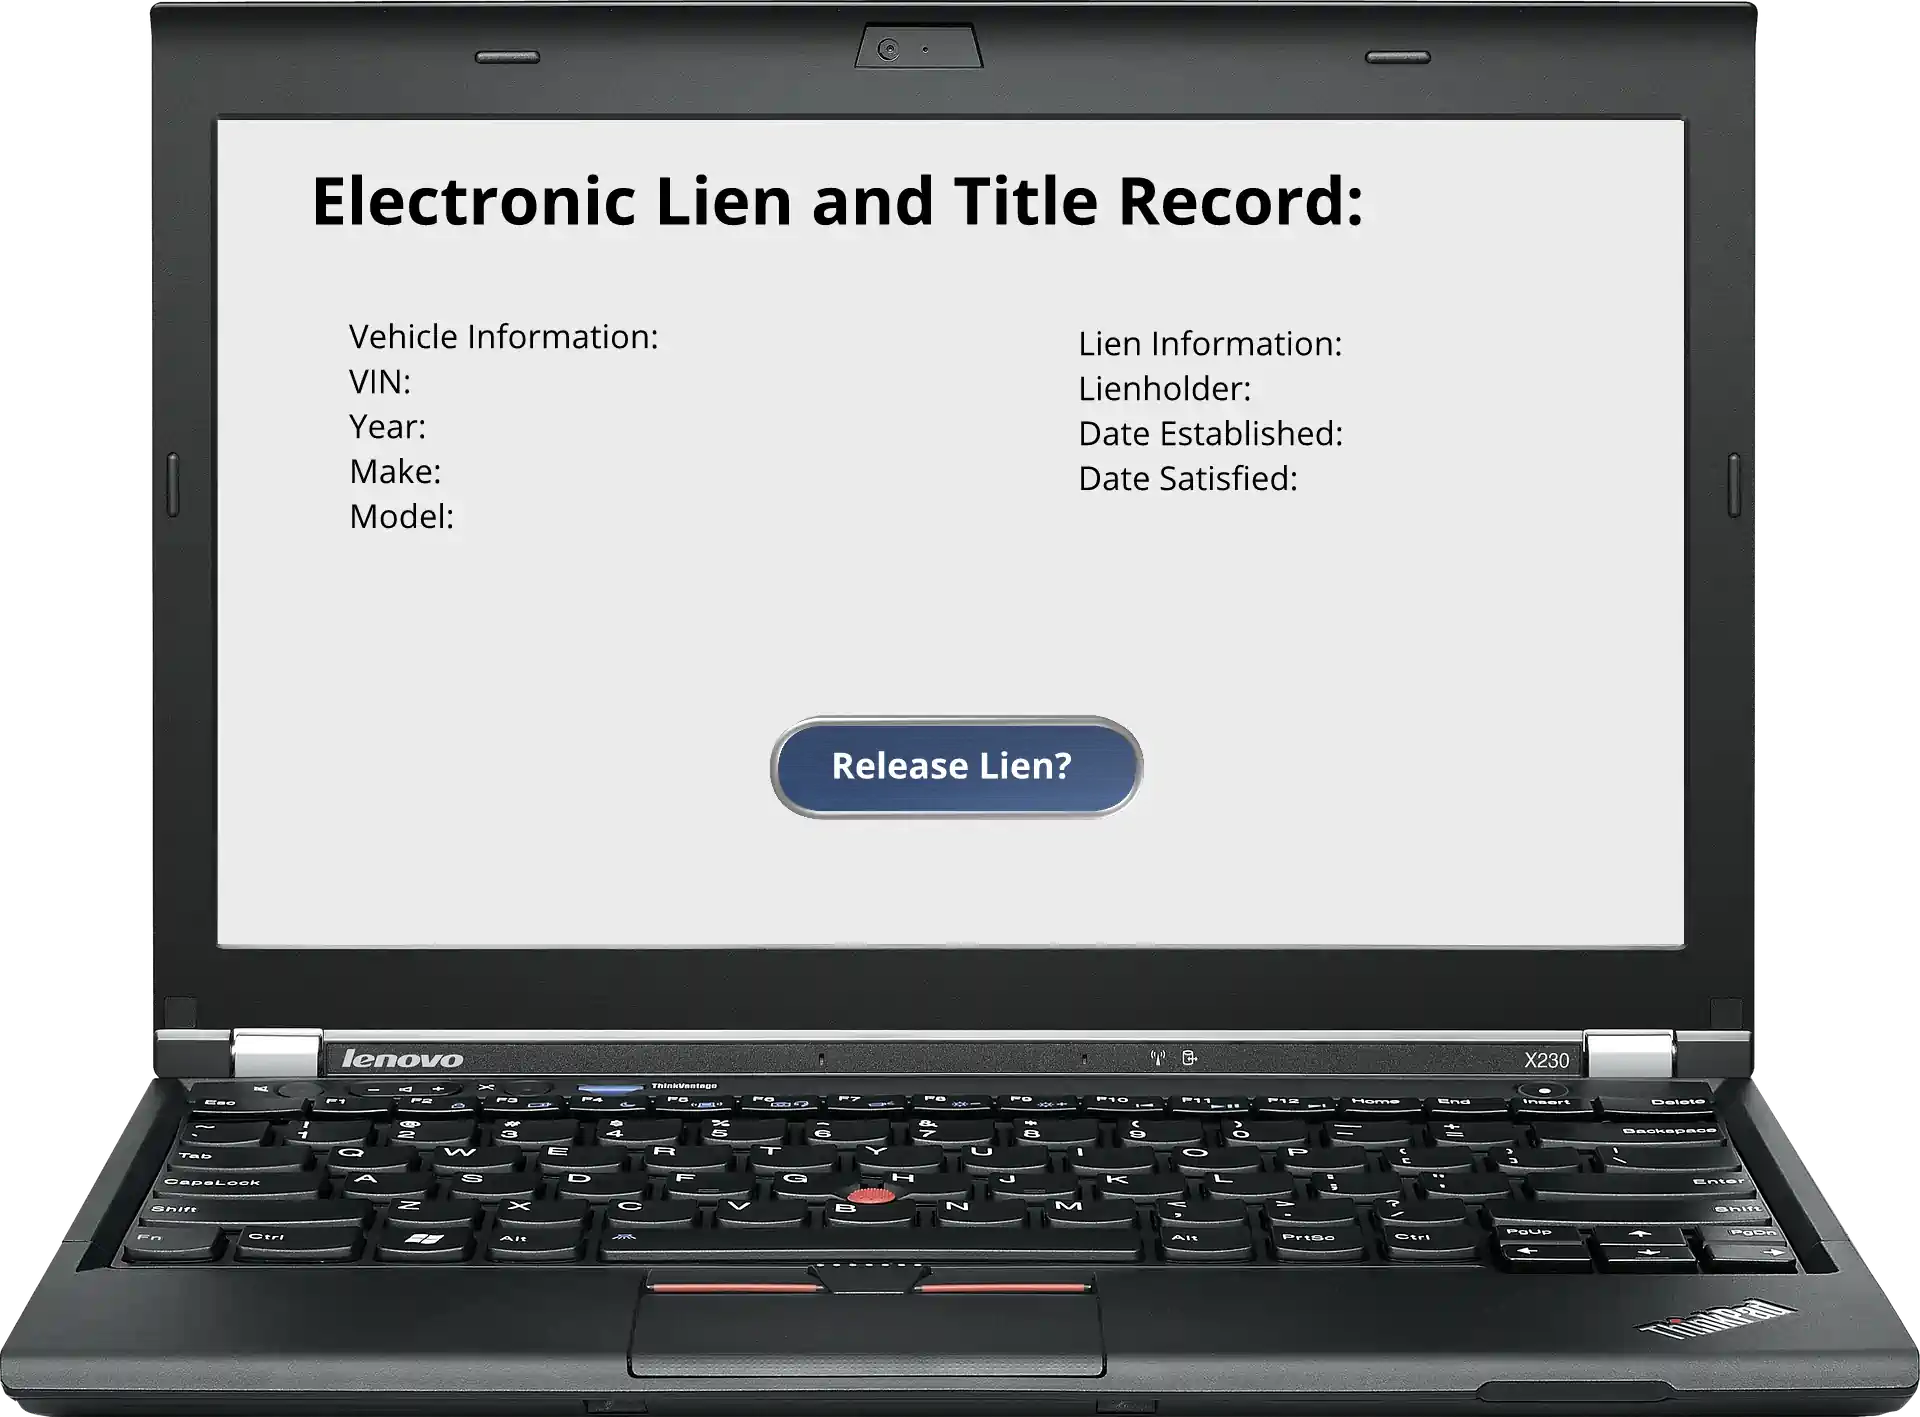 Second lien title loans with electronic liens